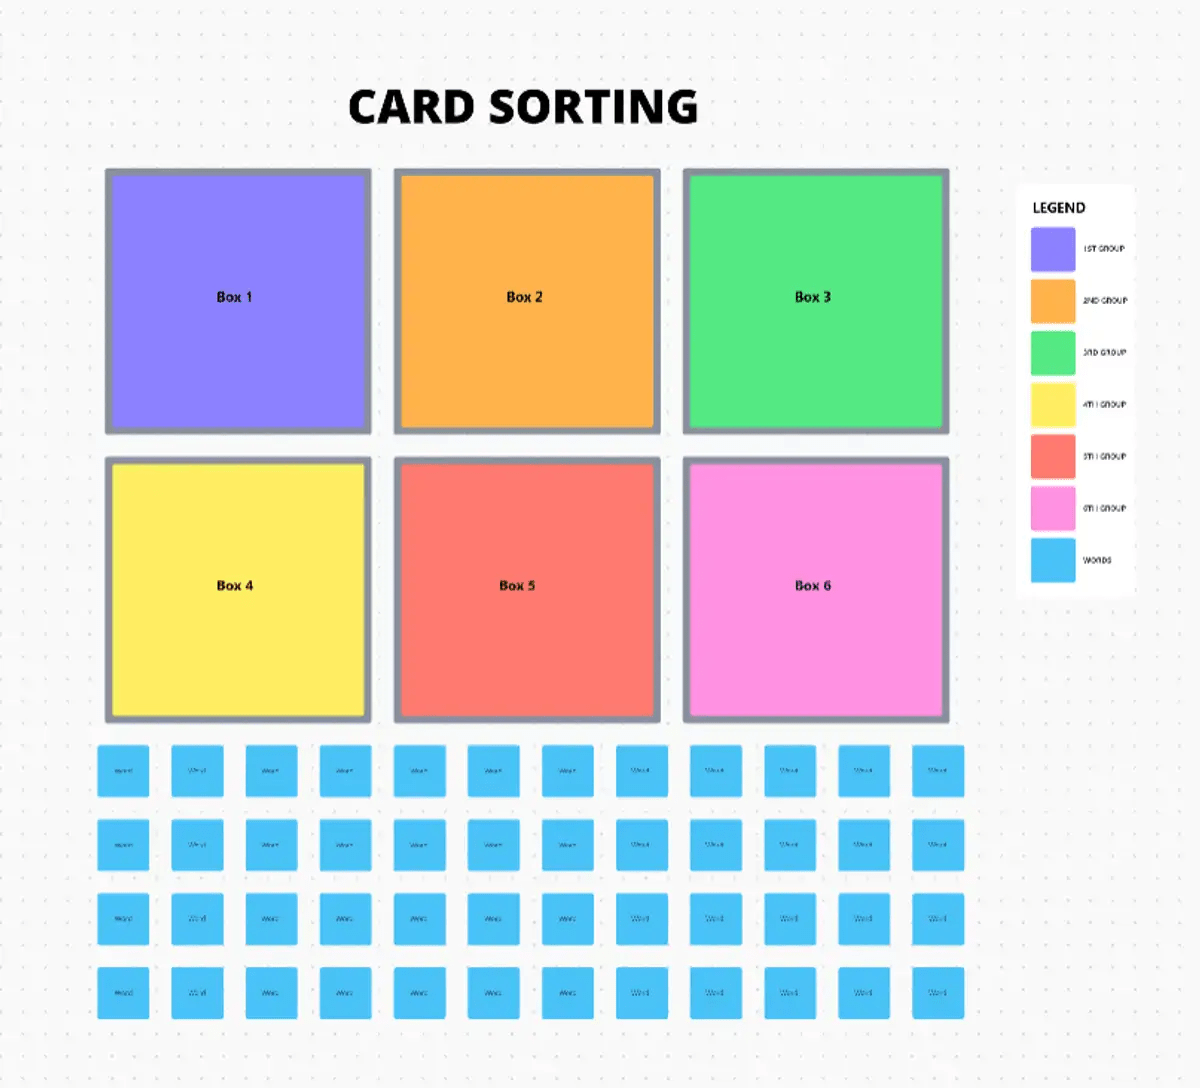 Create and manage your card sorting process with ease using the ClickUp Card Sorting Template